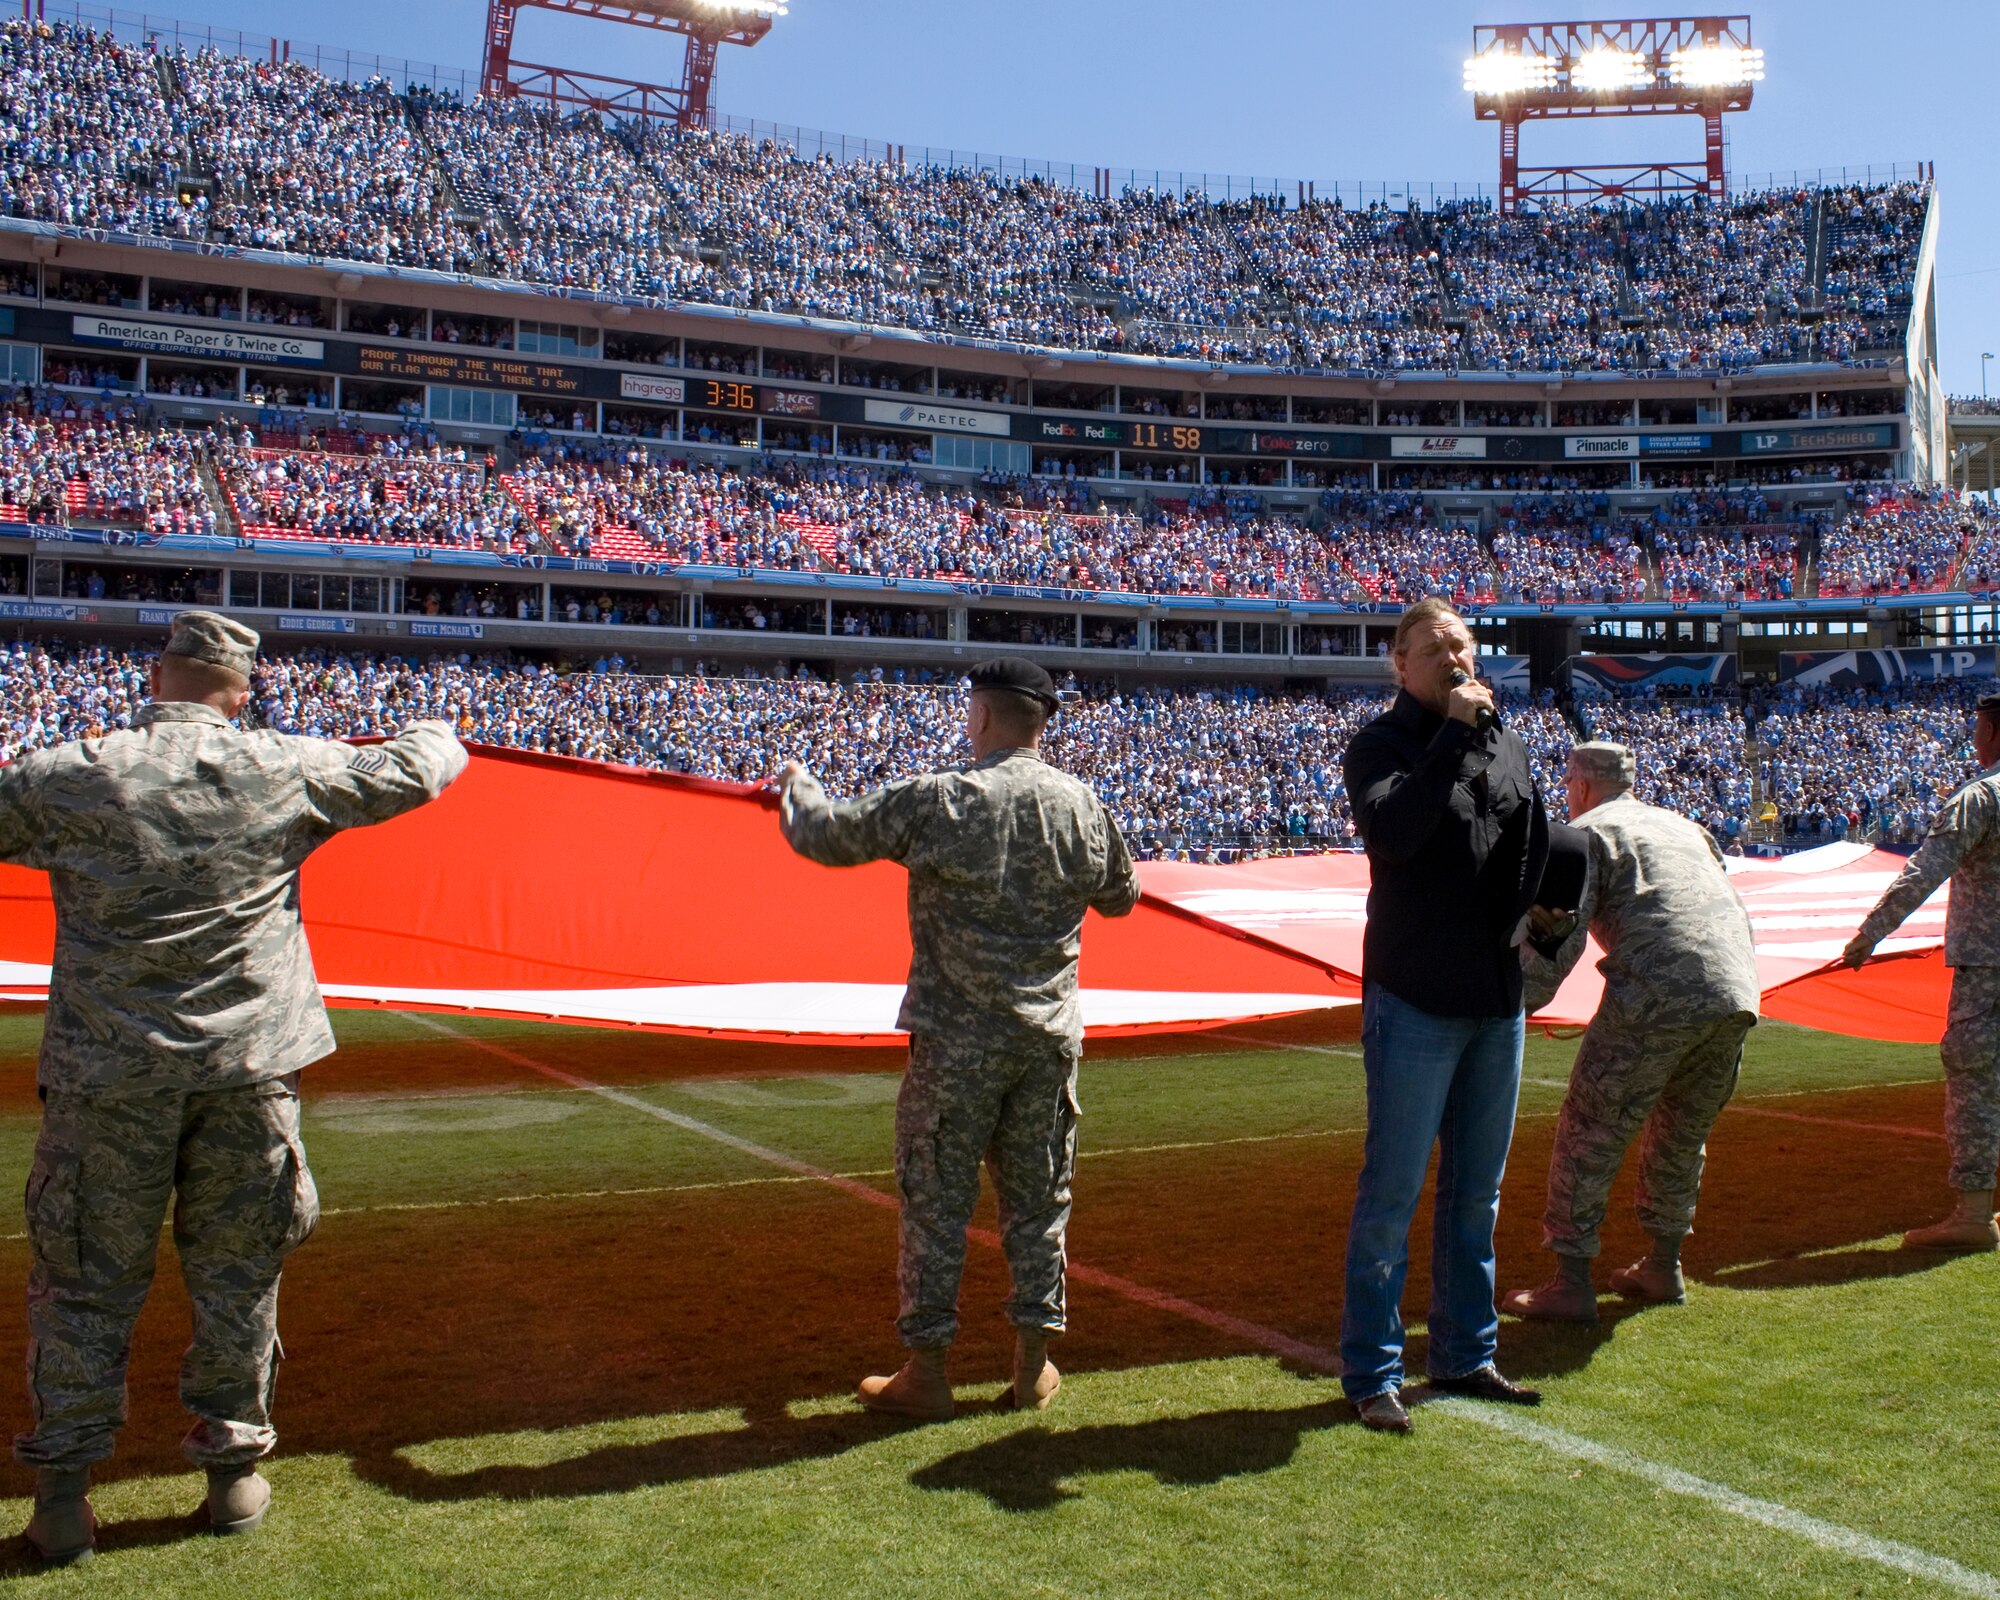 Country music star Trace Adkins, sings the national anthem in front of more than 140 Tennessee National Guard Soldiers and Airmen to kickoff the first game of the Titans season, Sept. 12.